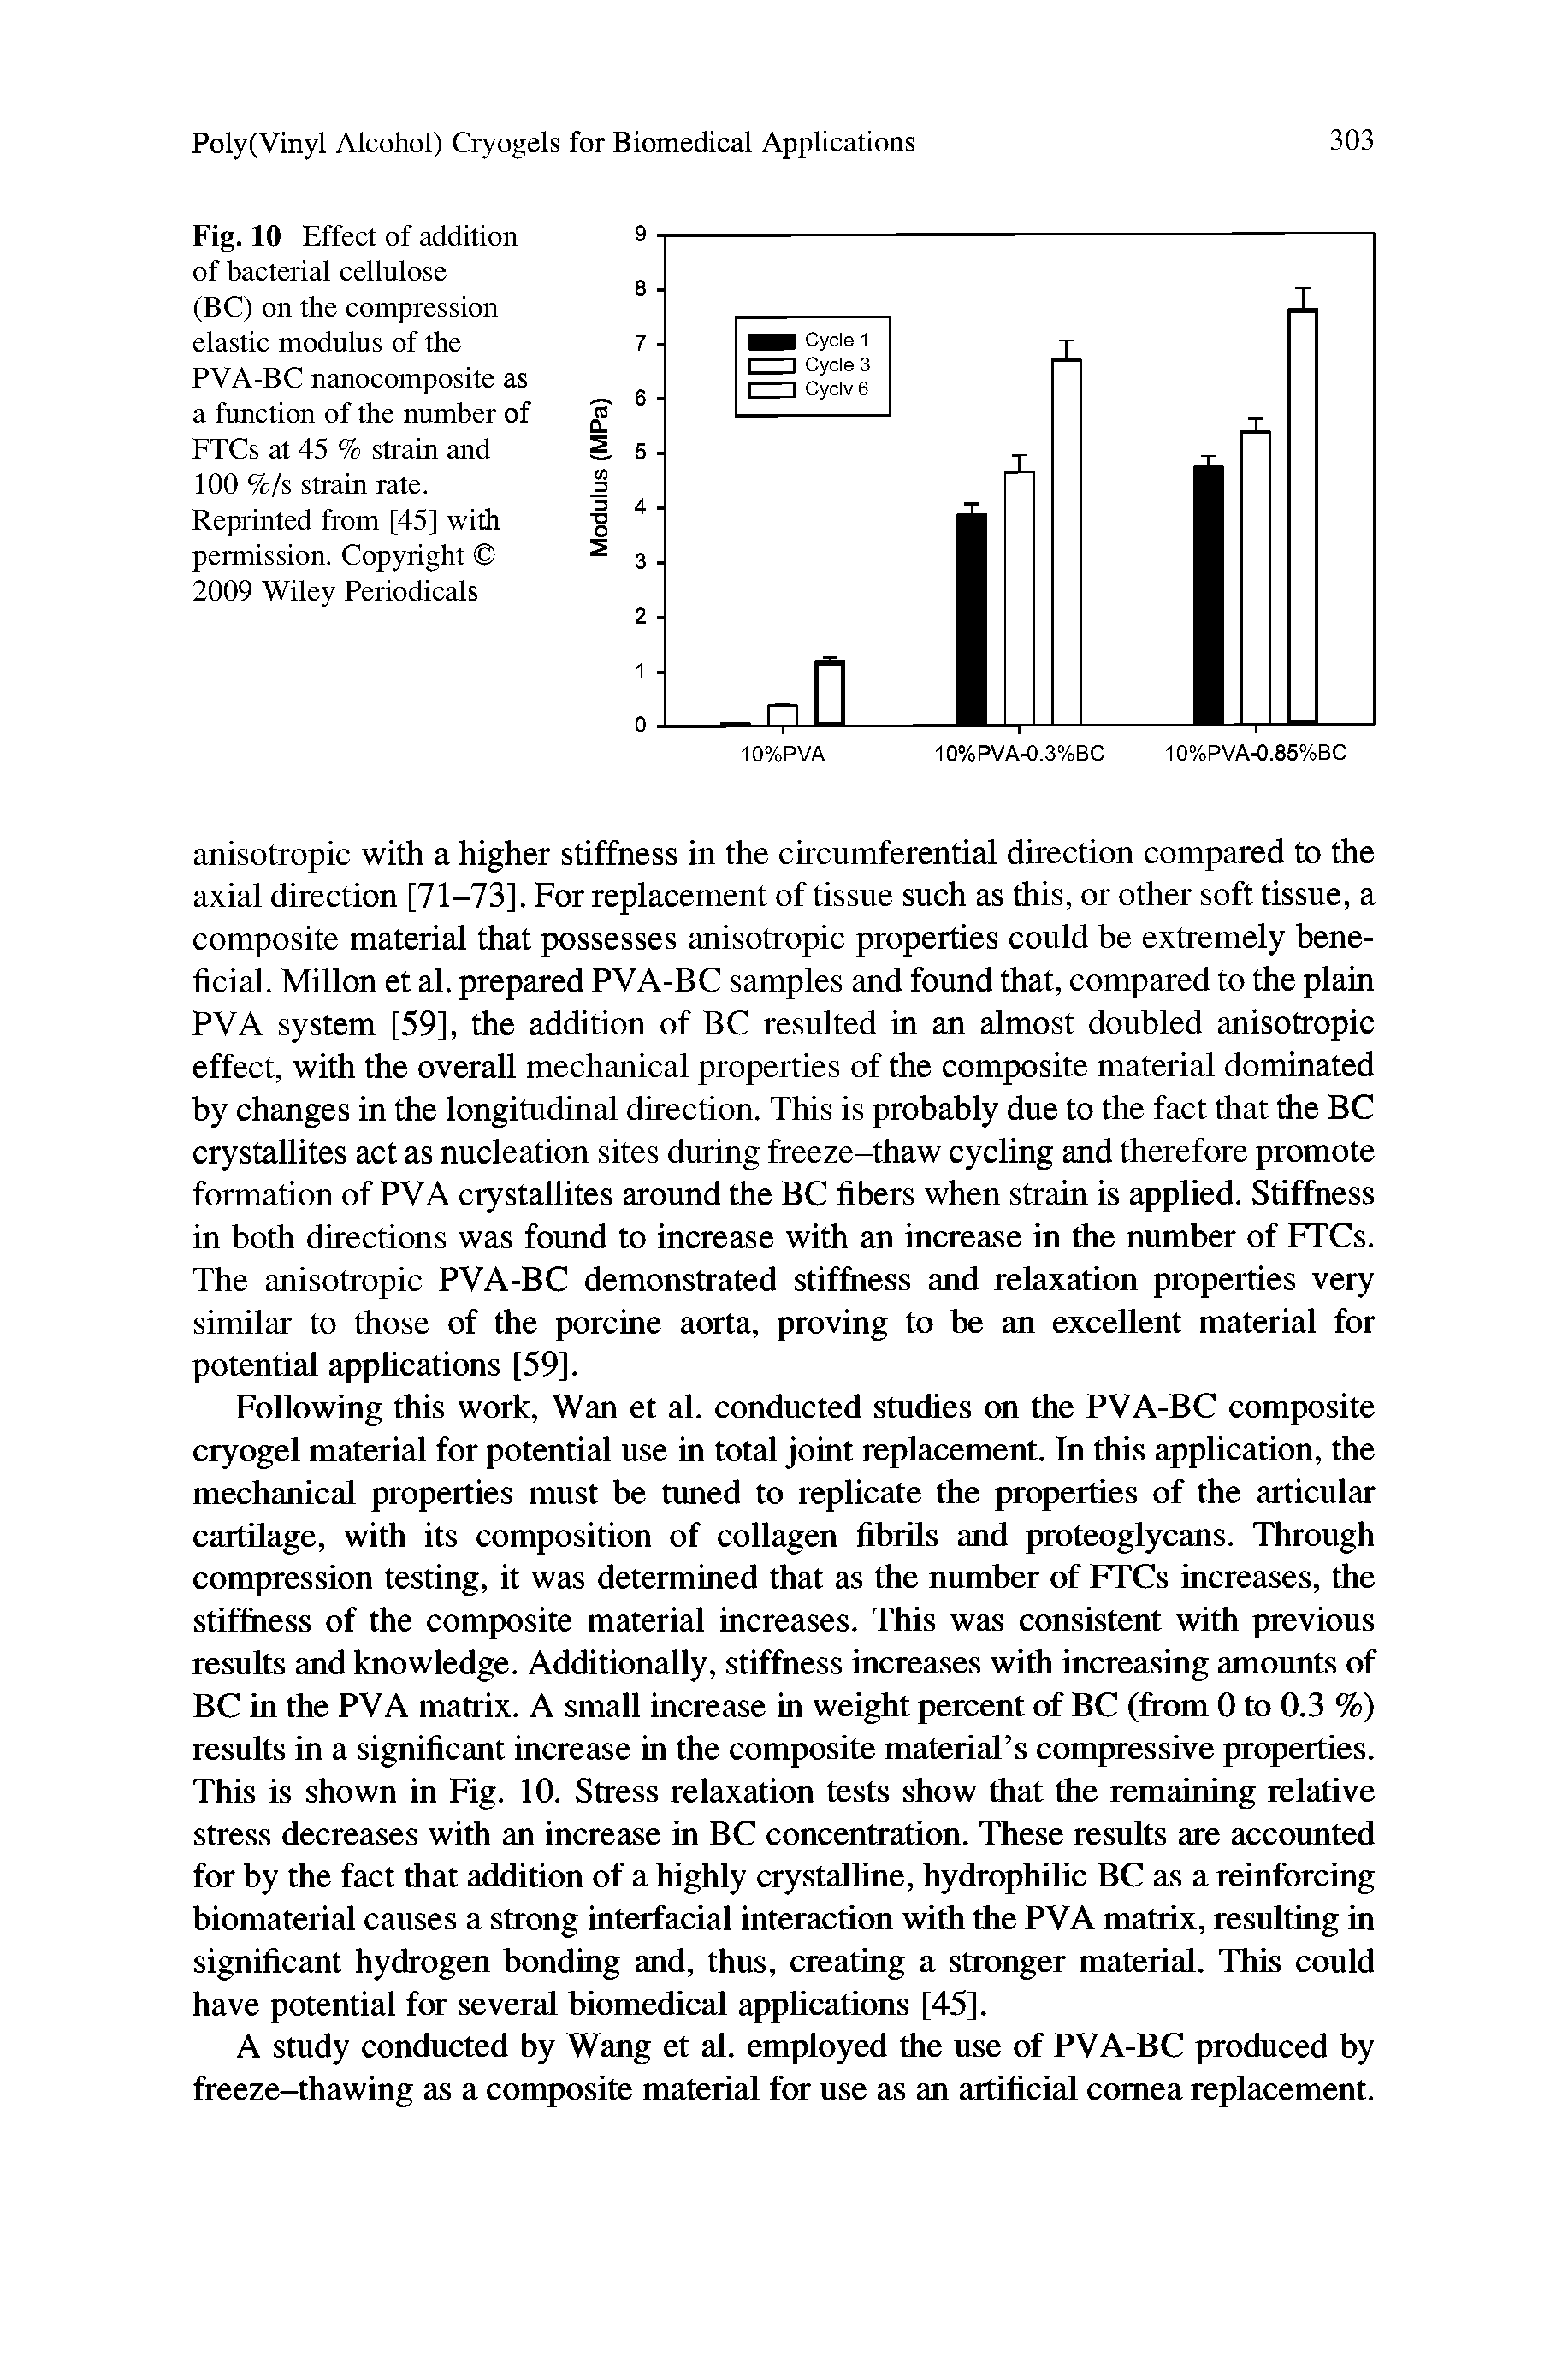 Fig. 10 Effect of addition of bacterial cellulose (BC) on the compression elastic modulus of the PVA-BC nanocomposite as a function of the number of ETCs at 45 % strain and 100 %/s strain rate. Reprinted from [45] with permission. Copyright 2009 Wiley Periodicals...